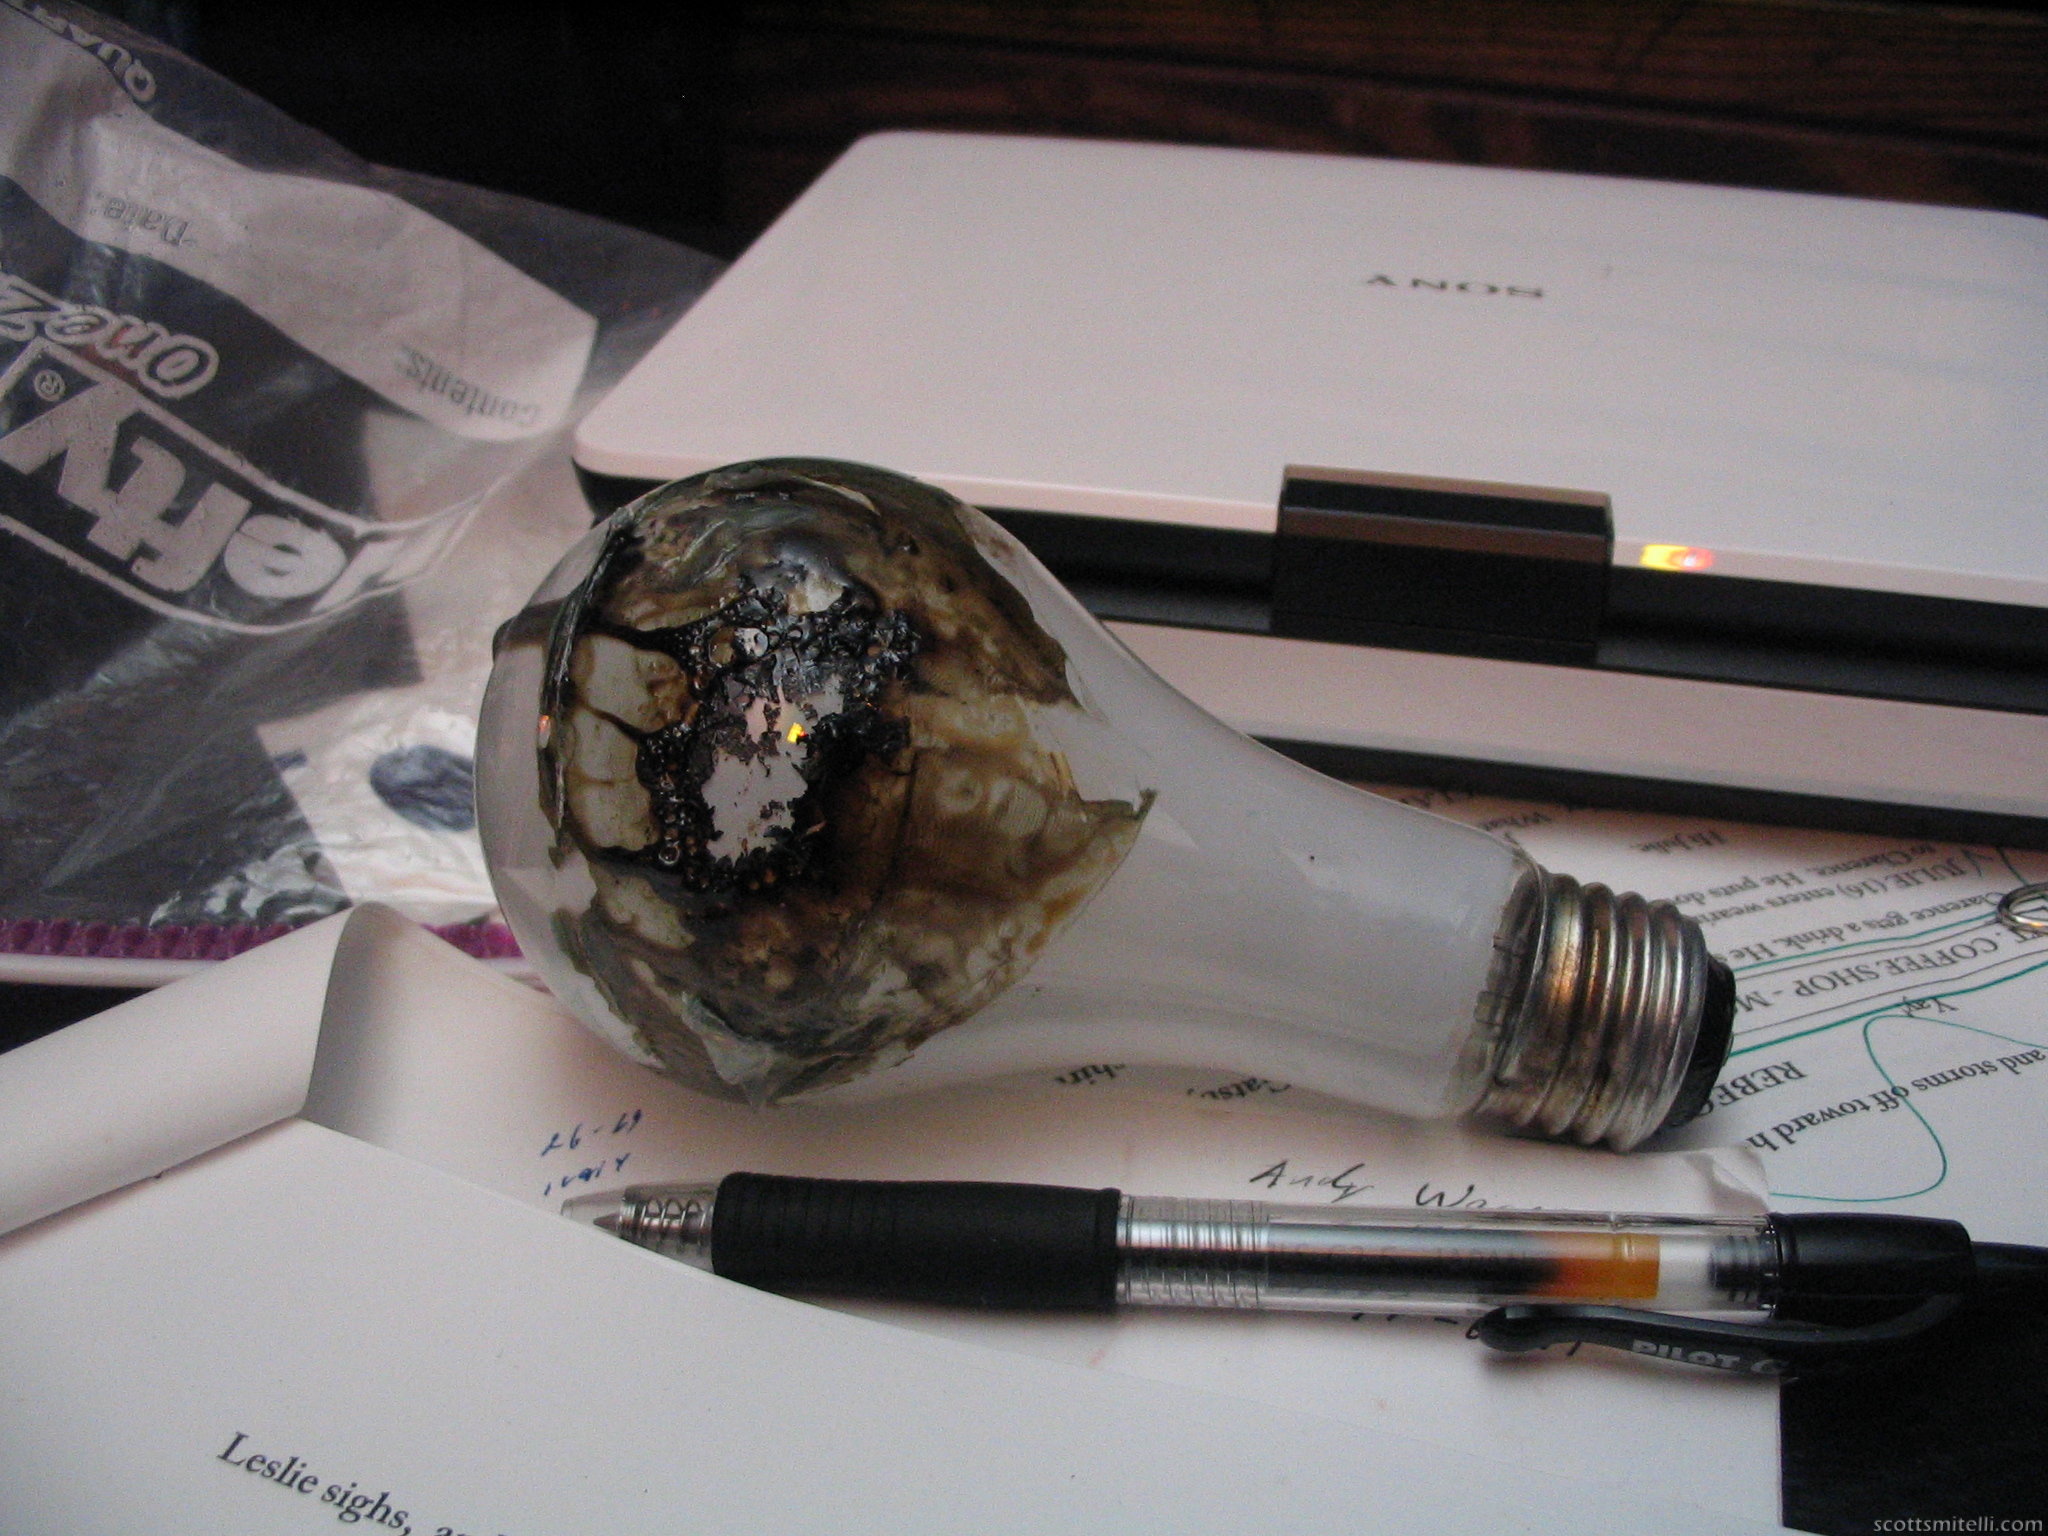 Best Bulb Ever